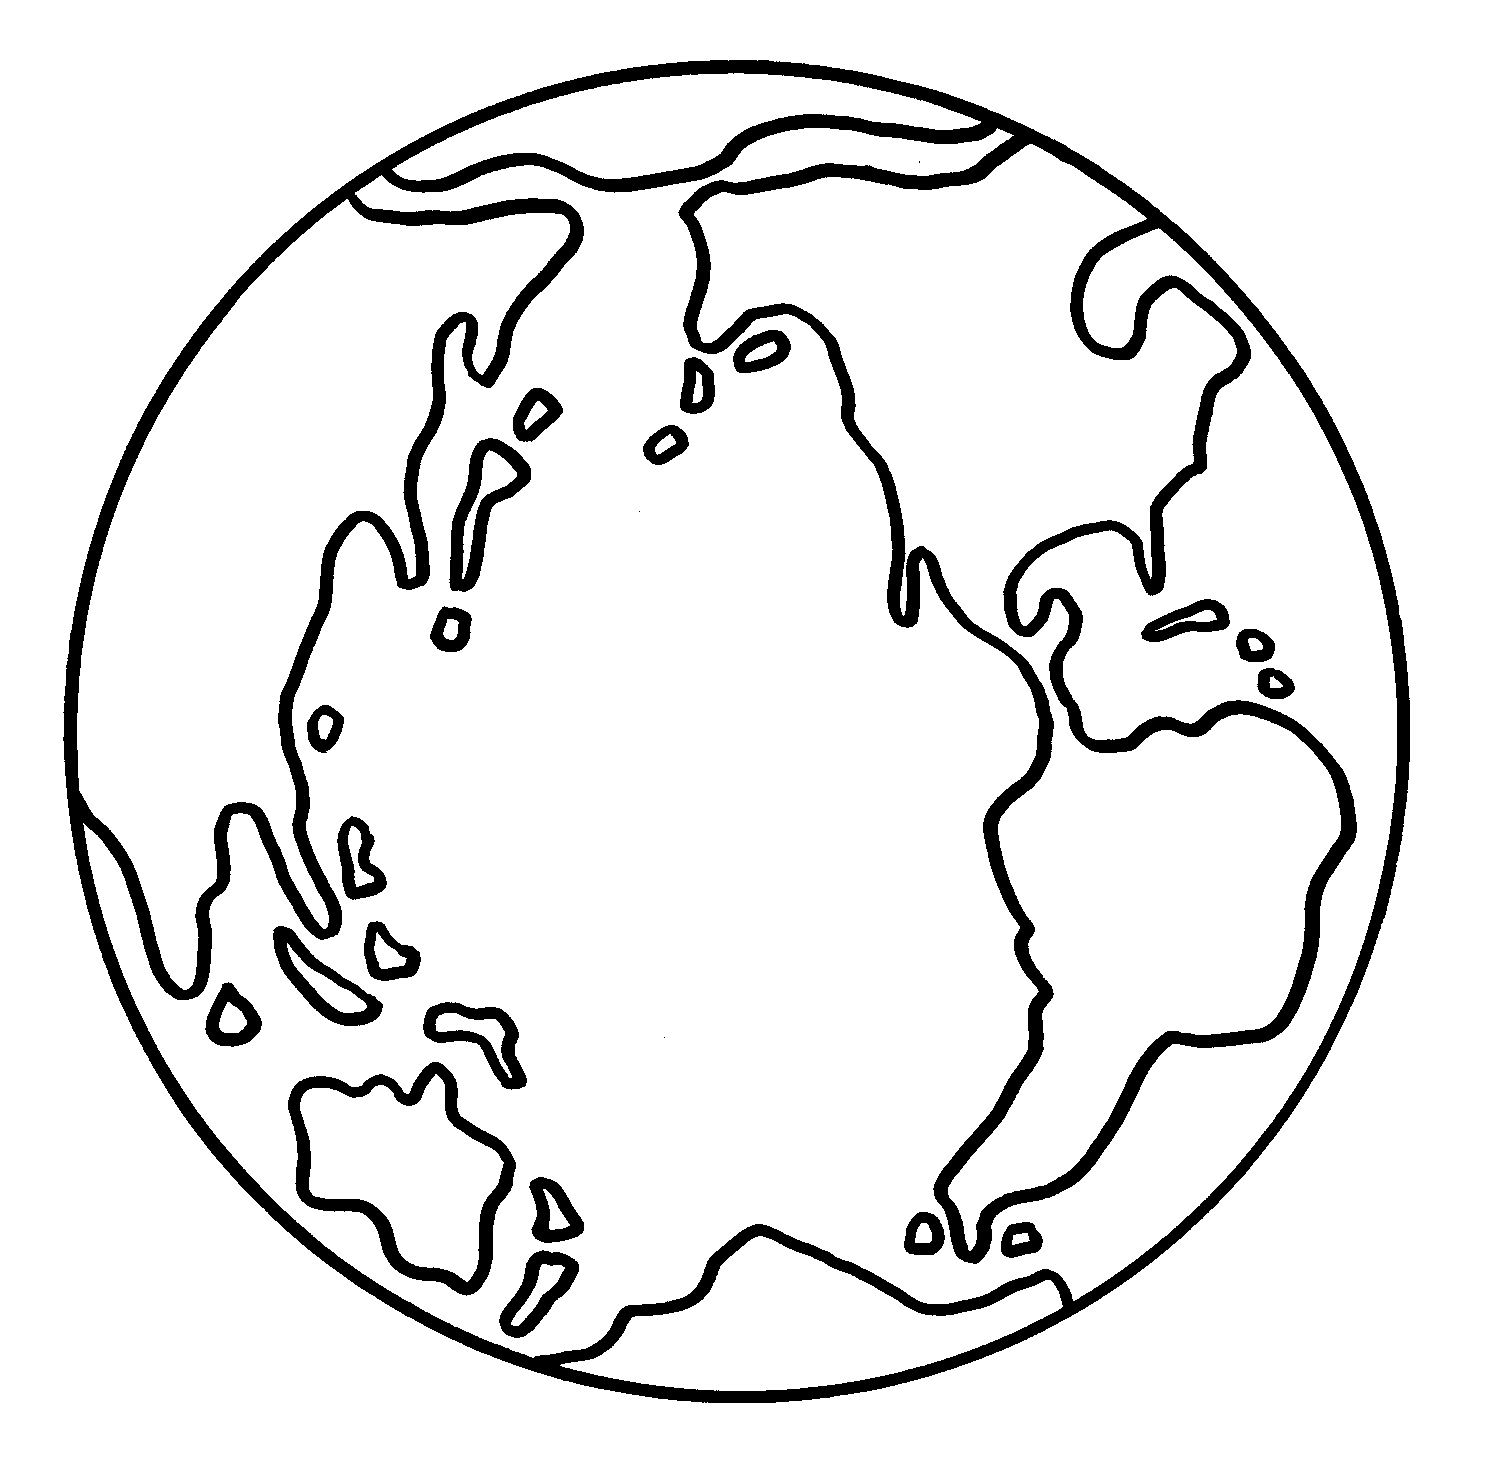 Earth Template Printable Coloringkids.co ClipArt Best ClipArt Best